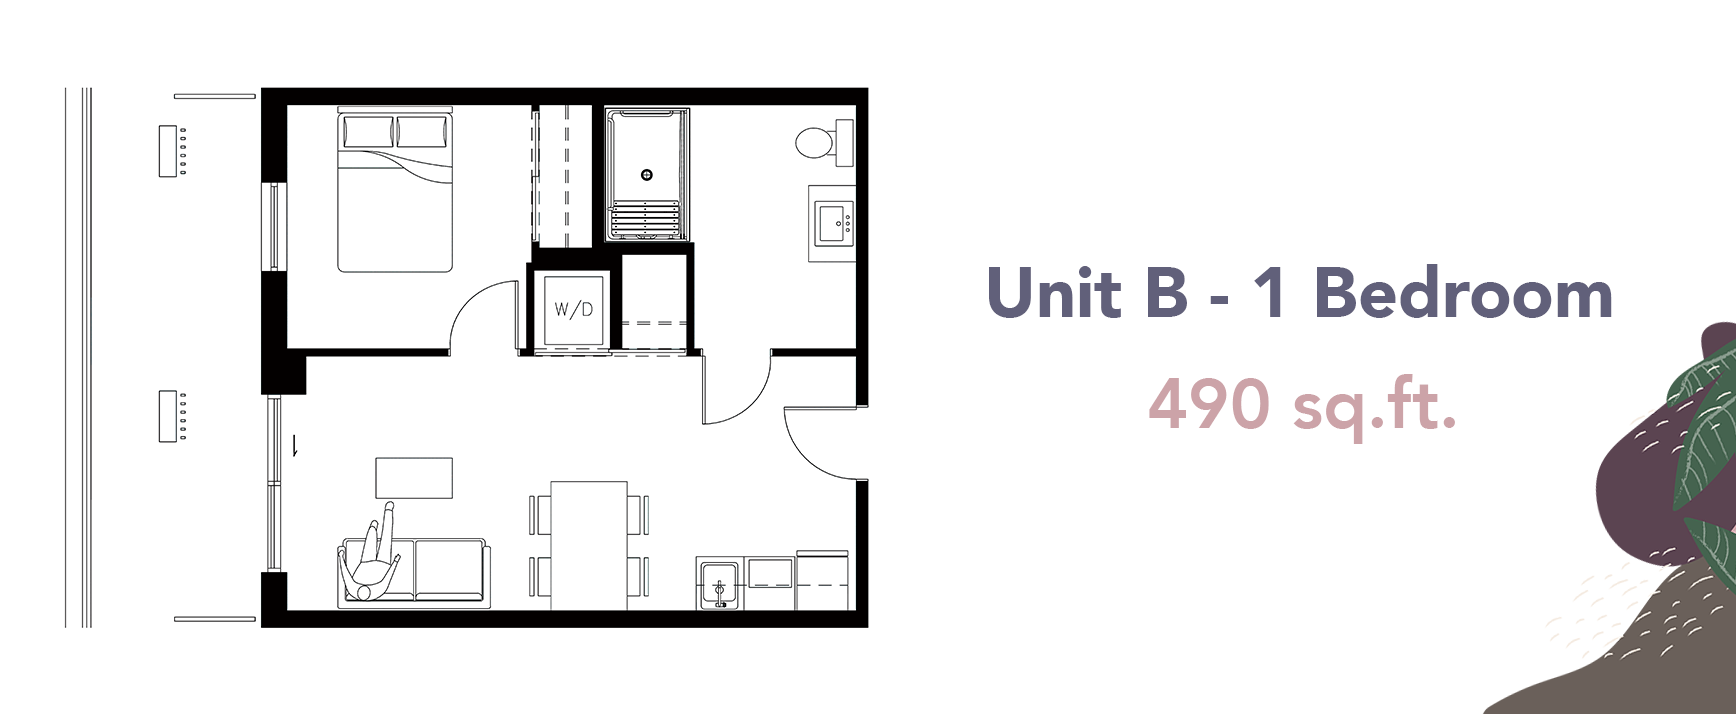 The floor plan of a Wisteria Place one bedroom senior apartment